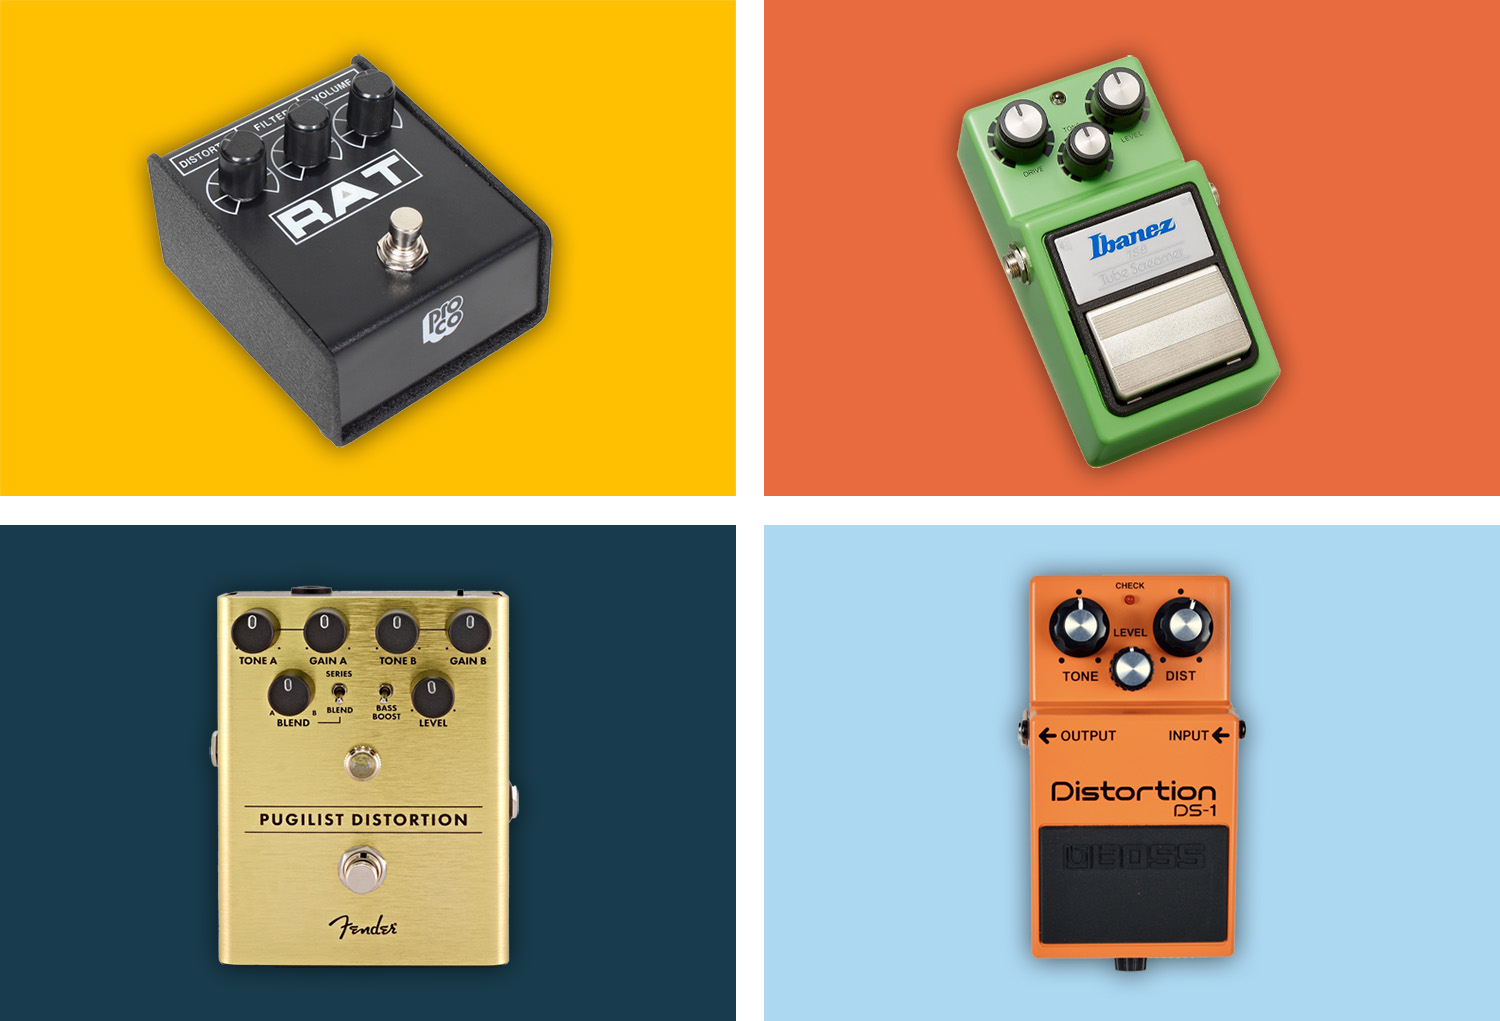 The best distortion pedals